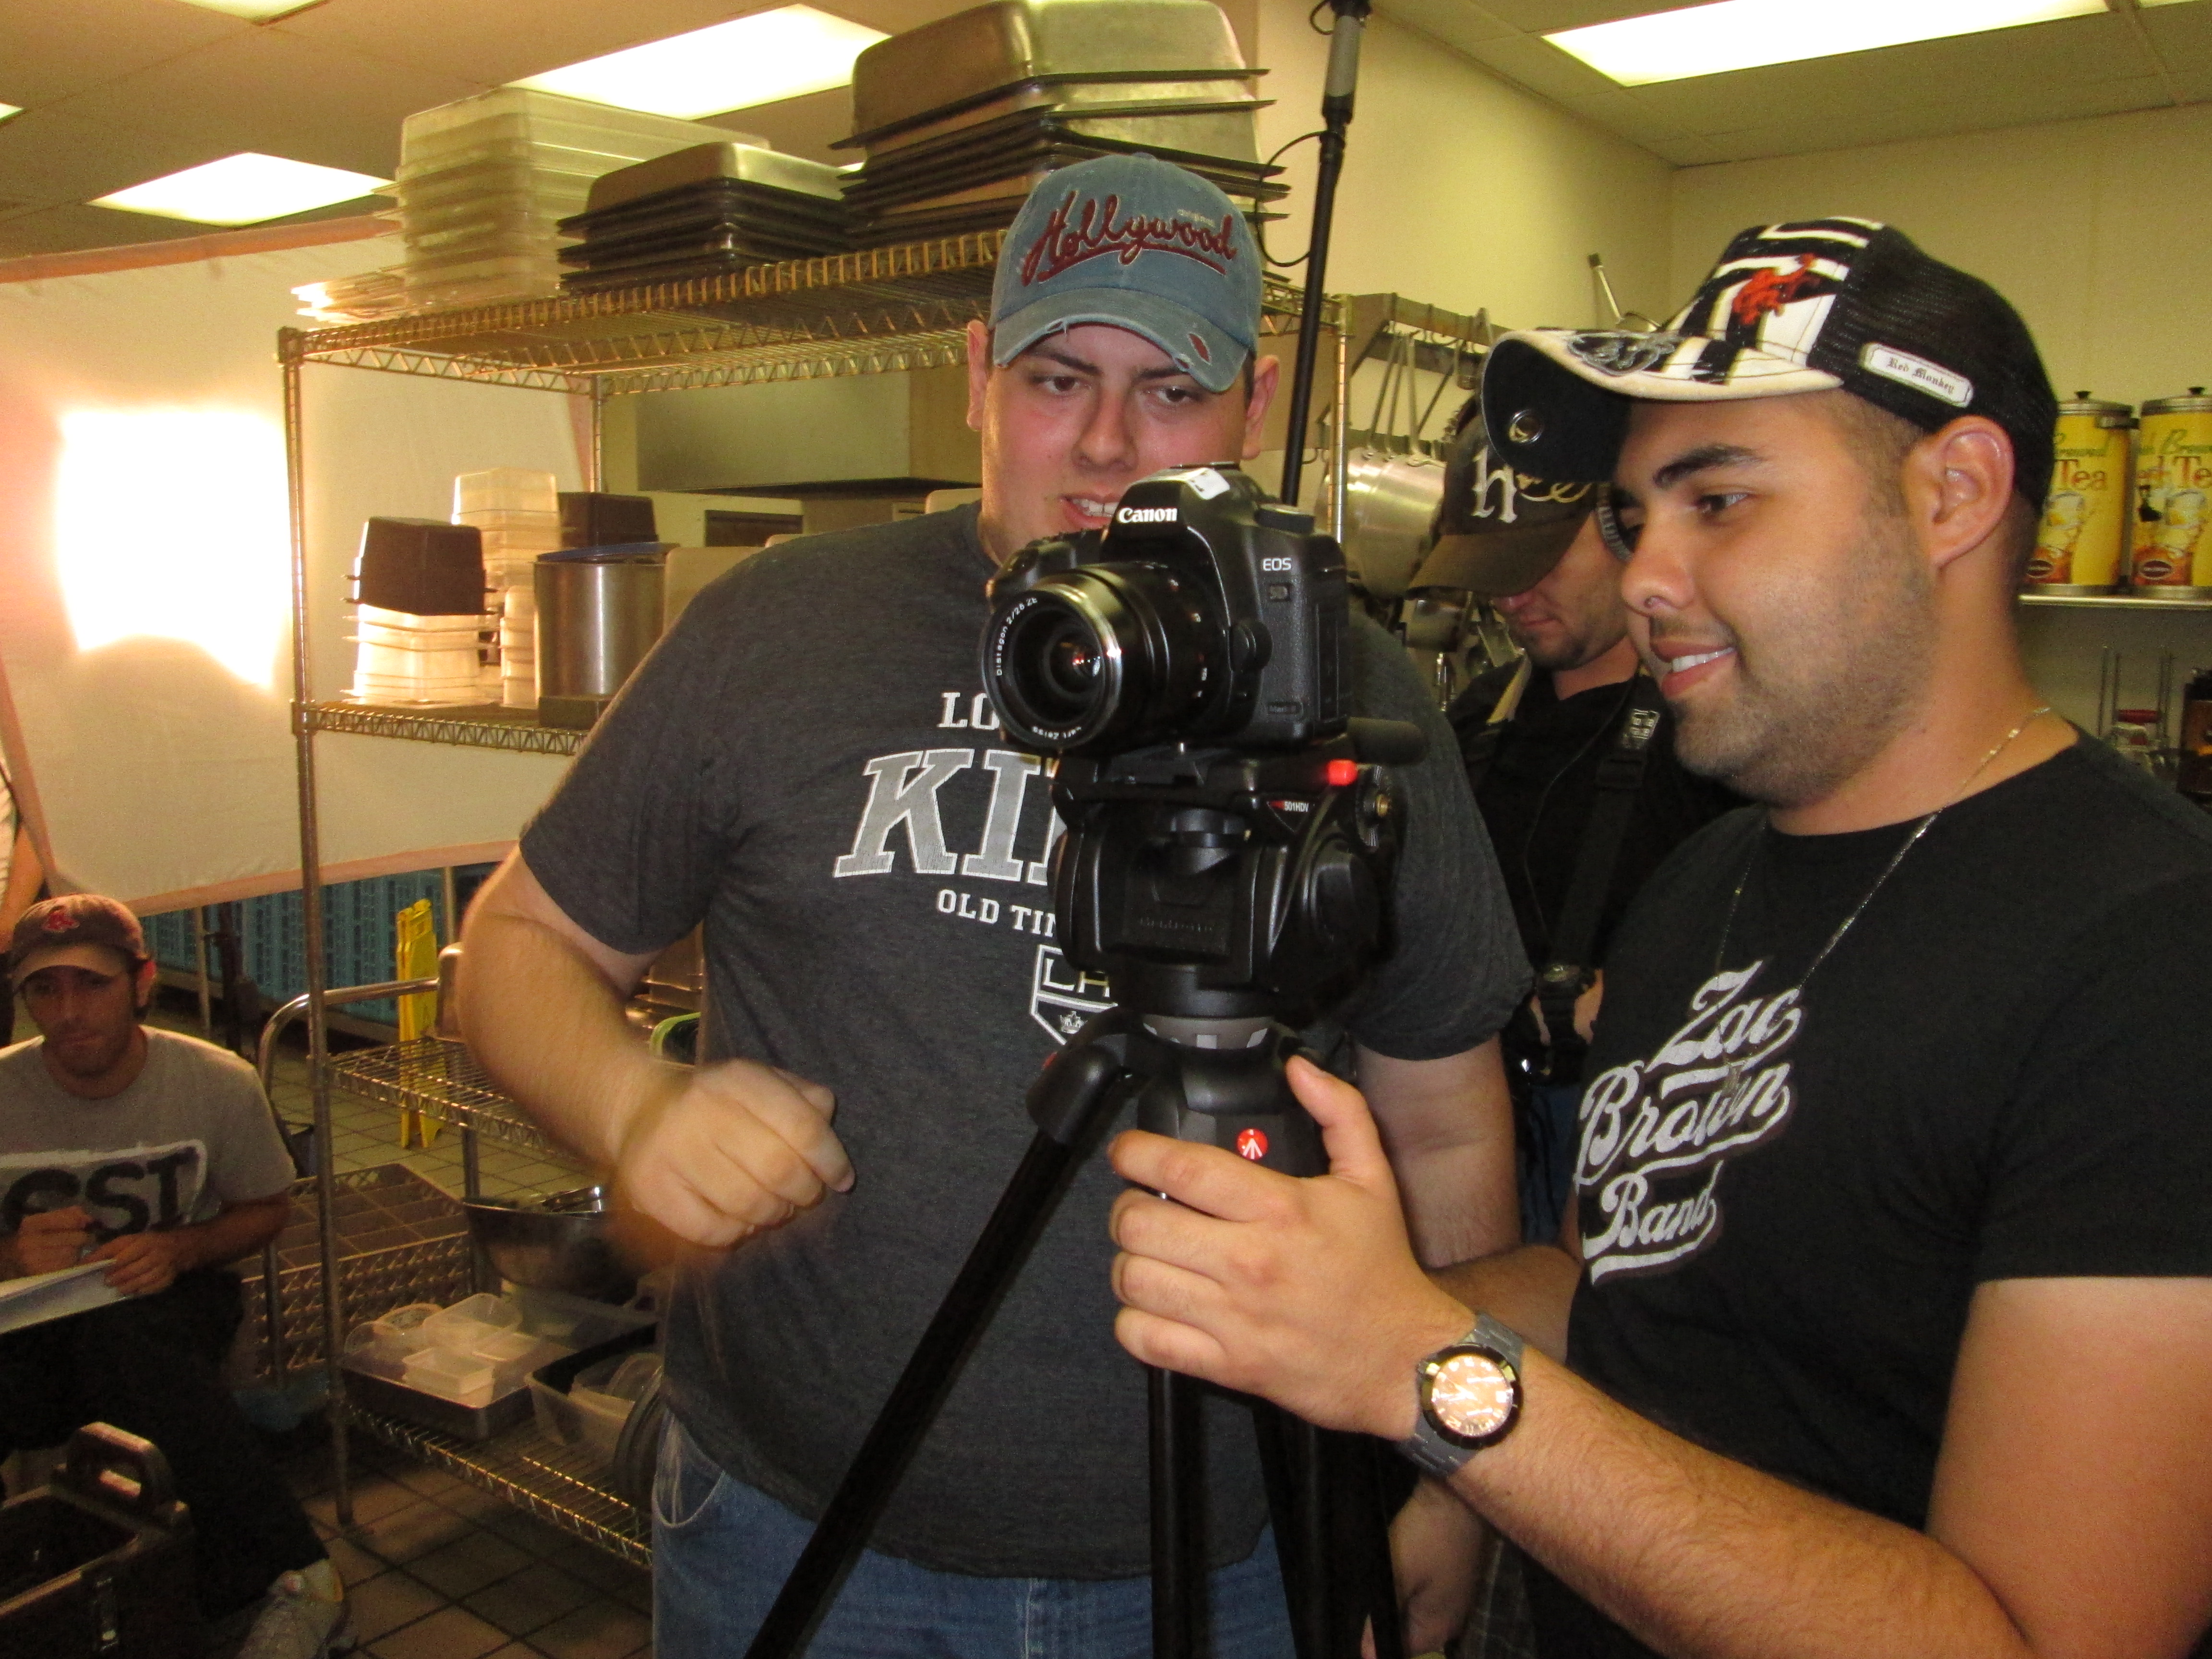 Andrew working as DP on One Moment, pictures with friend and collaborator Gui Pereira.